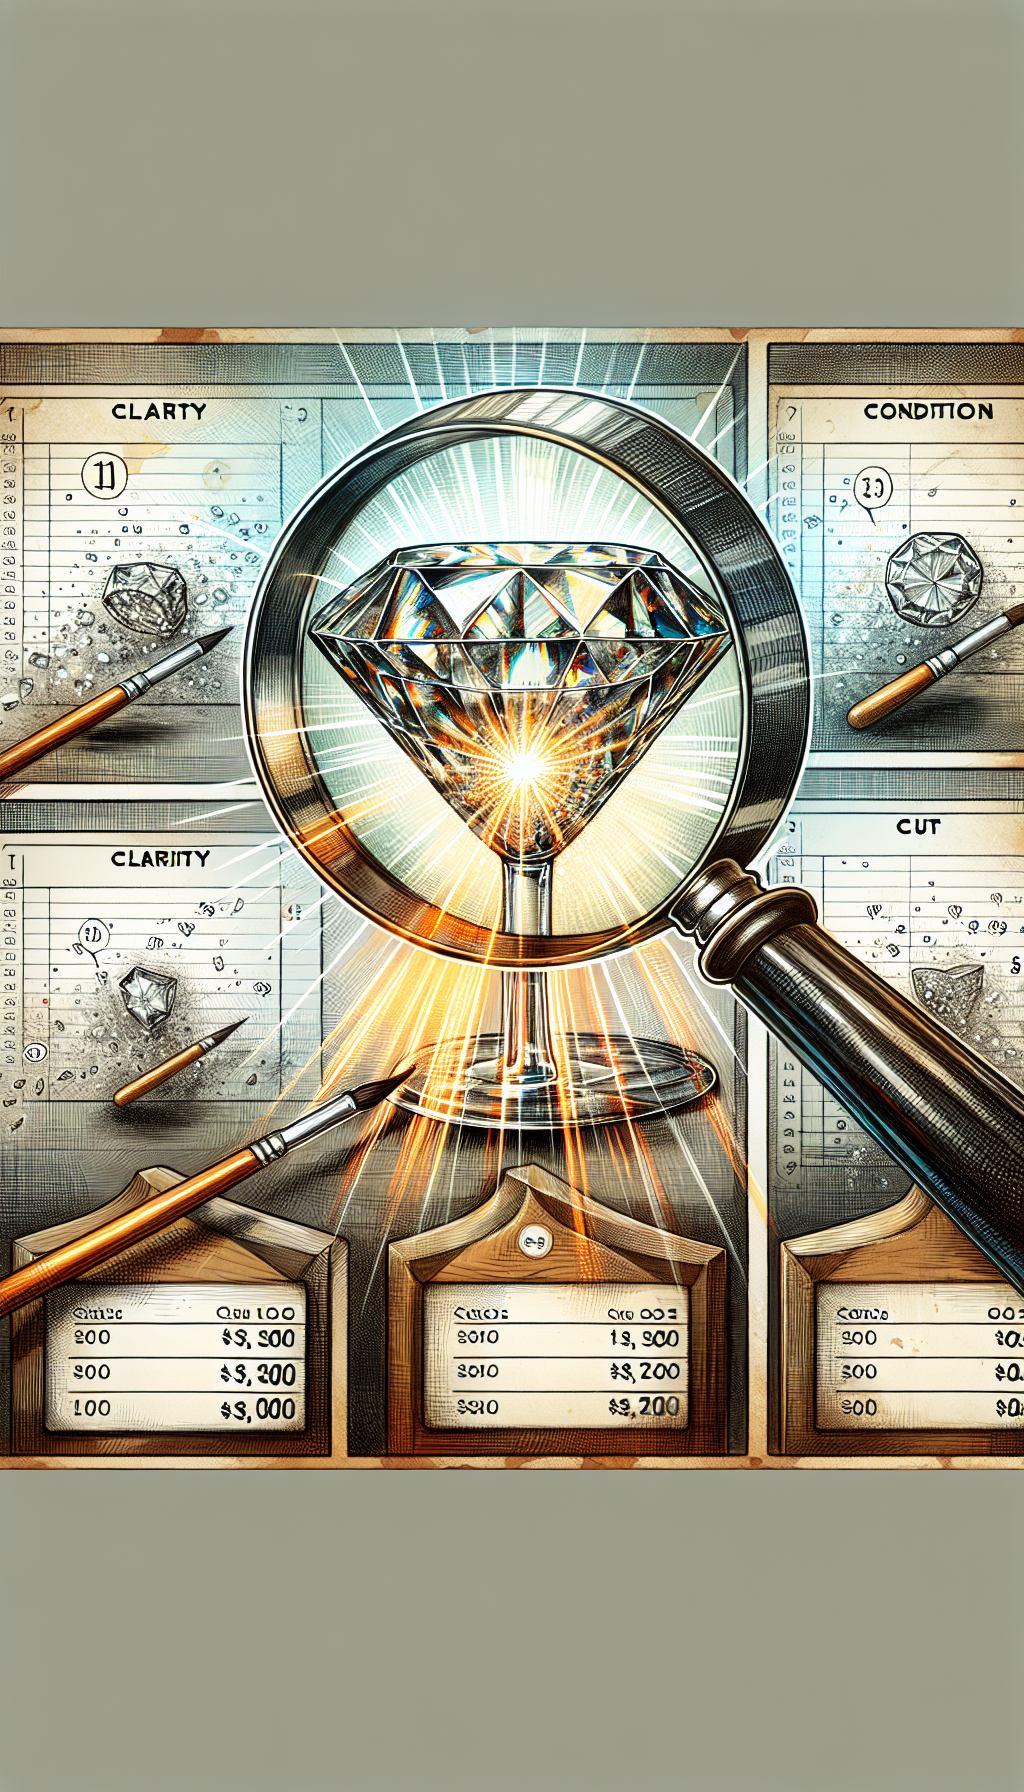 An illustration depicts a gleaming antique crystal glass under a magnifying glass, with each facet labeled "Clarity," "Cut," and "Condition." Light rays scatter through the crystal, landing on three ascending auction paddles with price tags, symbolizing the increase in value based on the quality factors. The background alternates between sketch lines, vivid watercolors, and digital pixels, representing diverse appraisal methods.